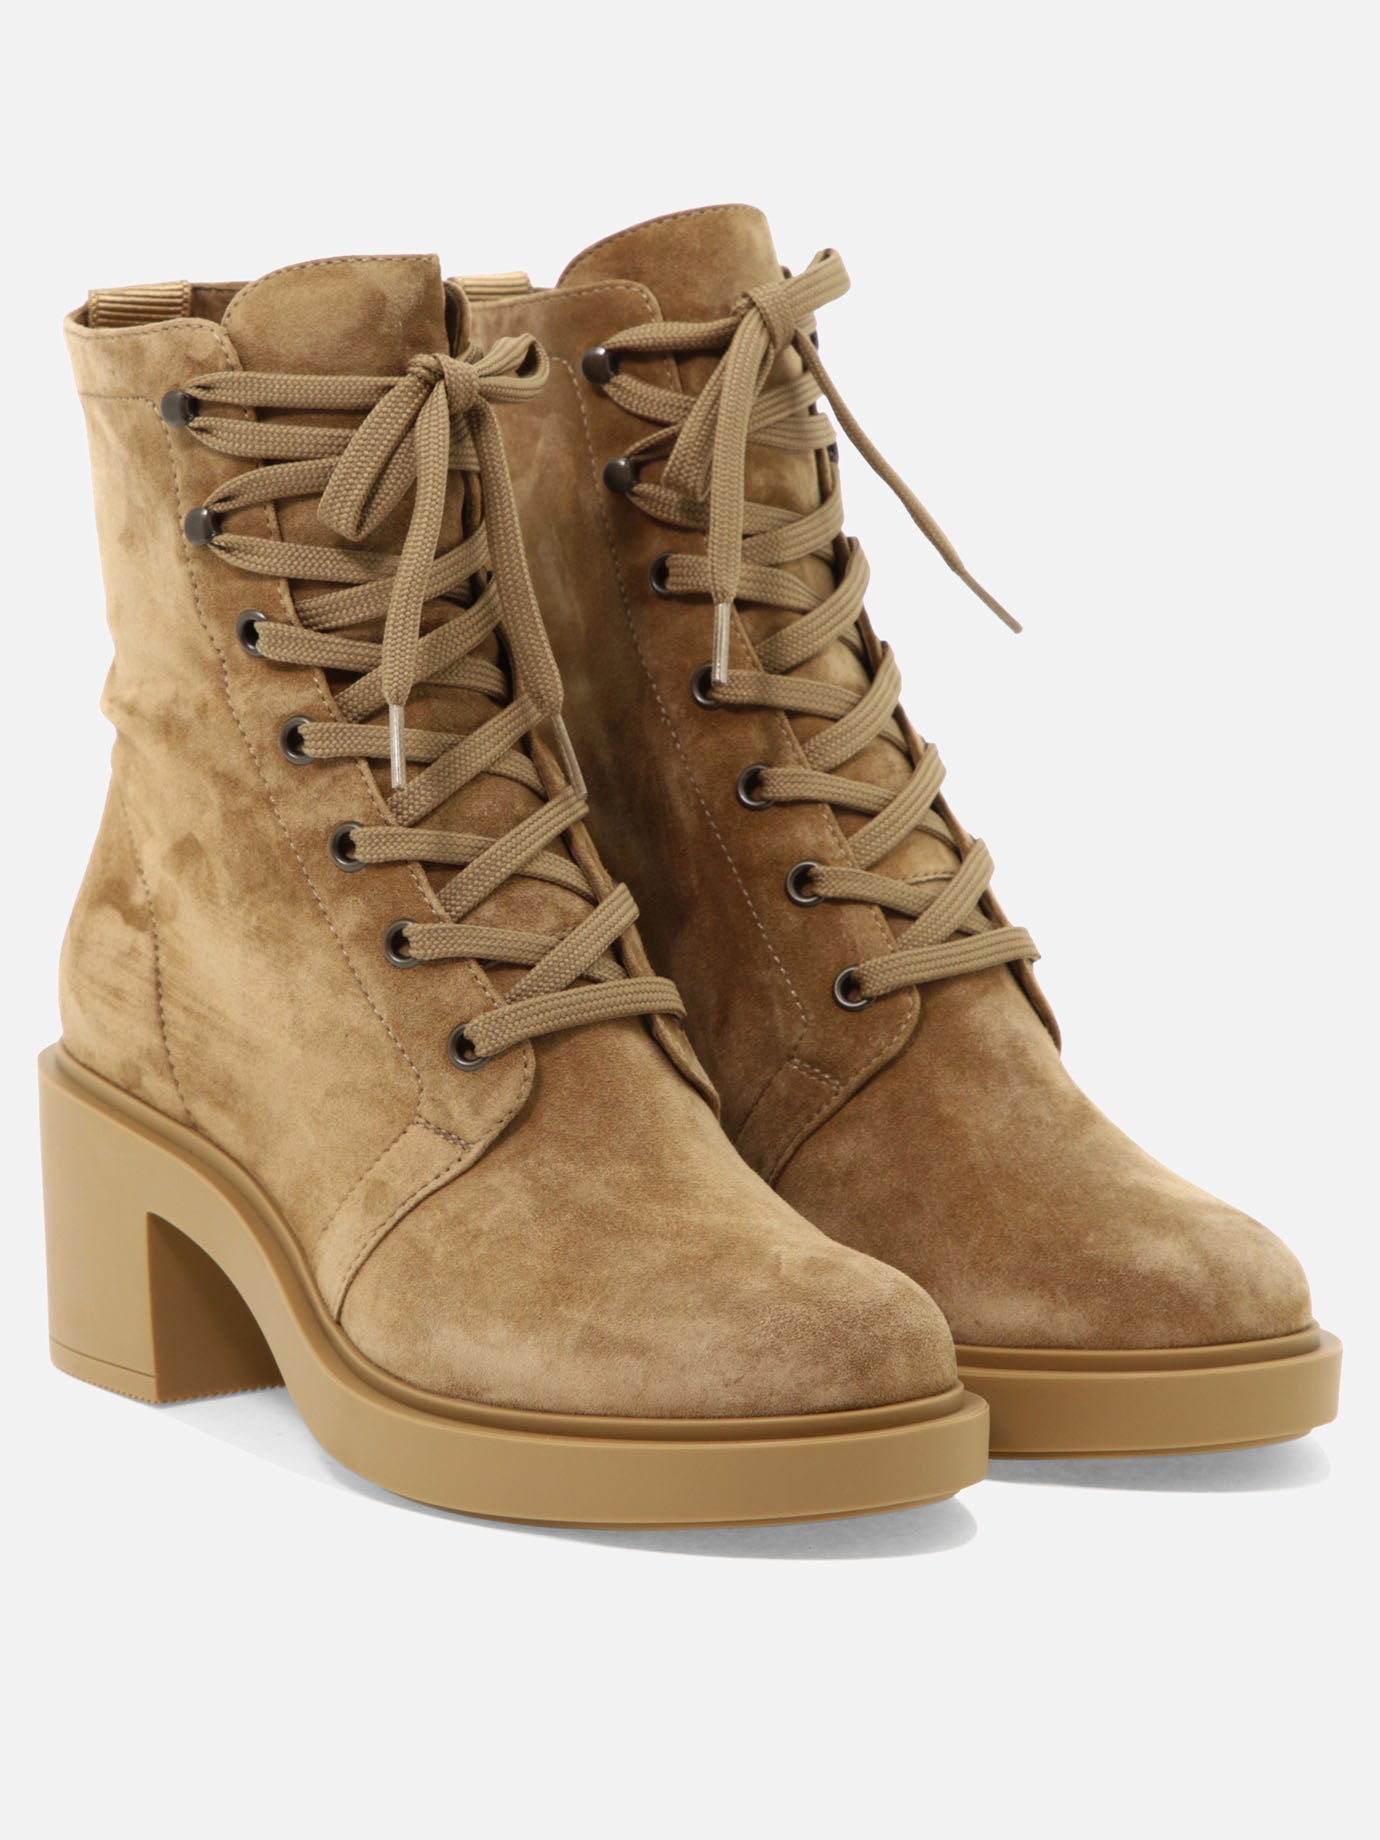 "Foster" lace-up boots